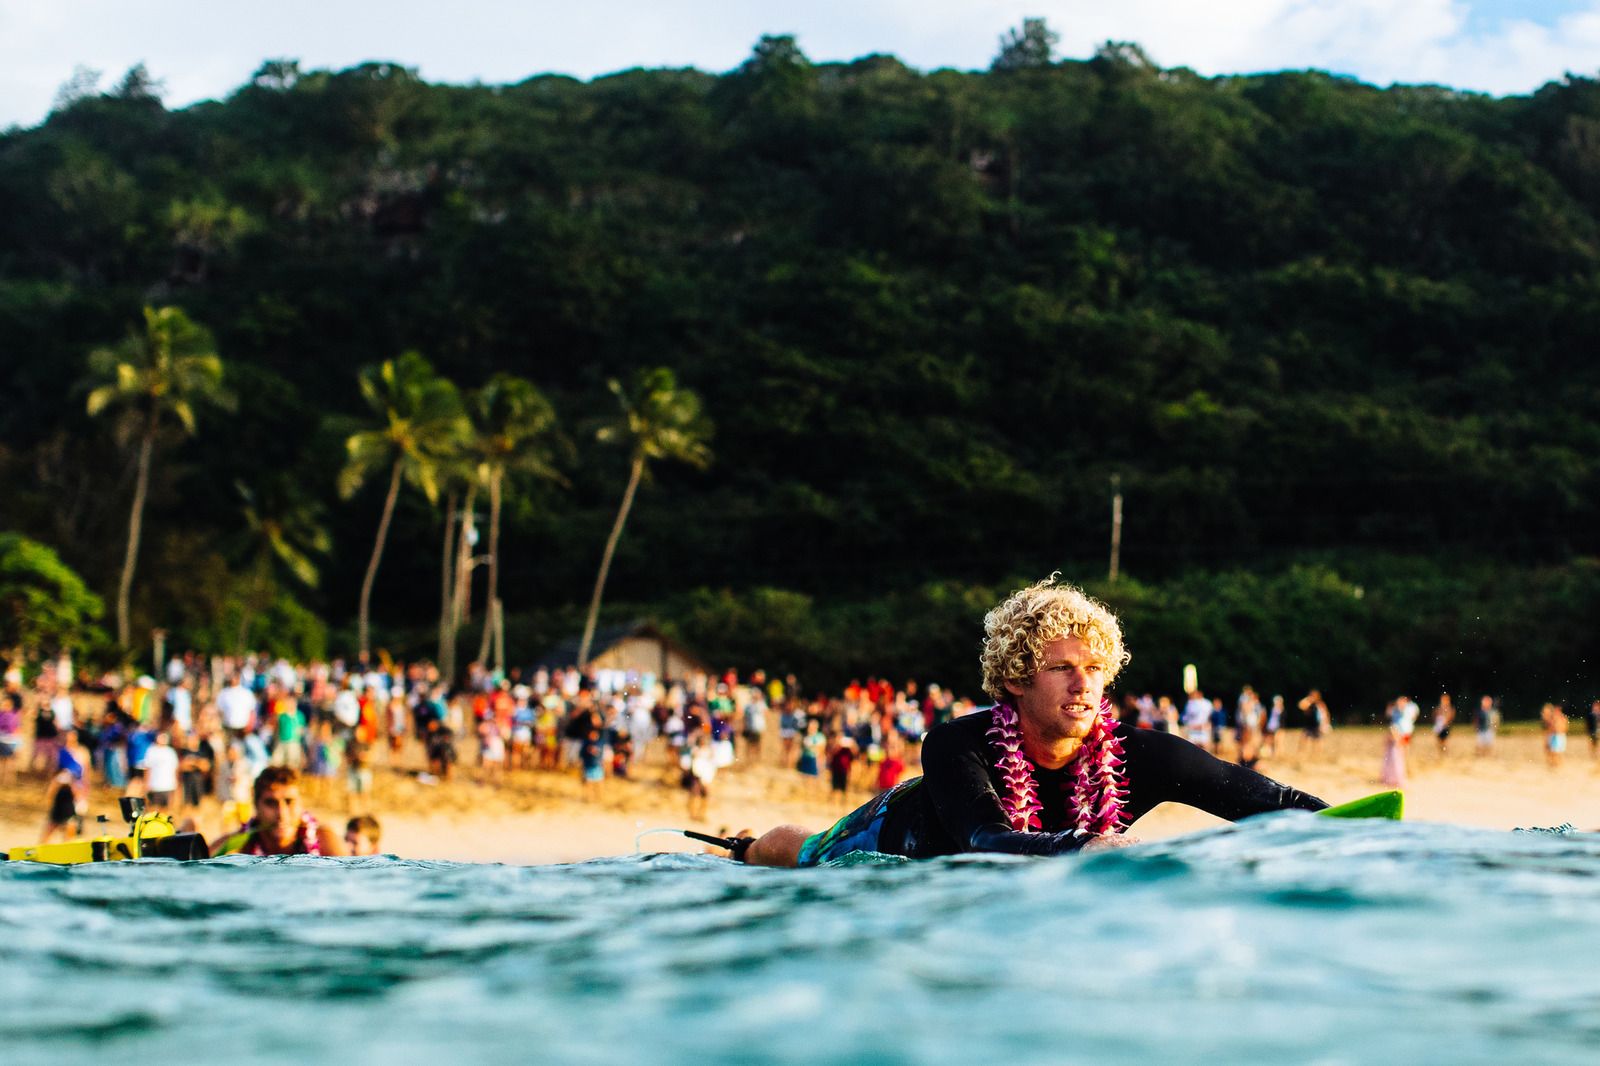 WORLD’S BEST BIG WAVE RIDERS JOIN AIKAU FAMILY TO HONOR EDDIE AIKAU AT